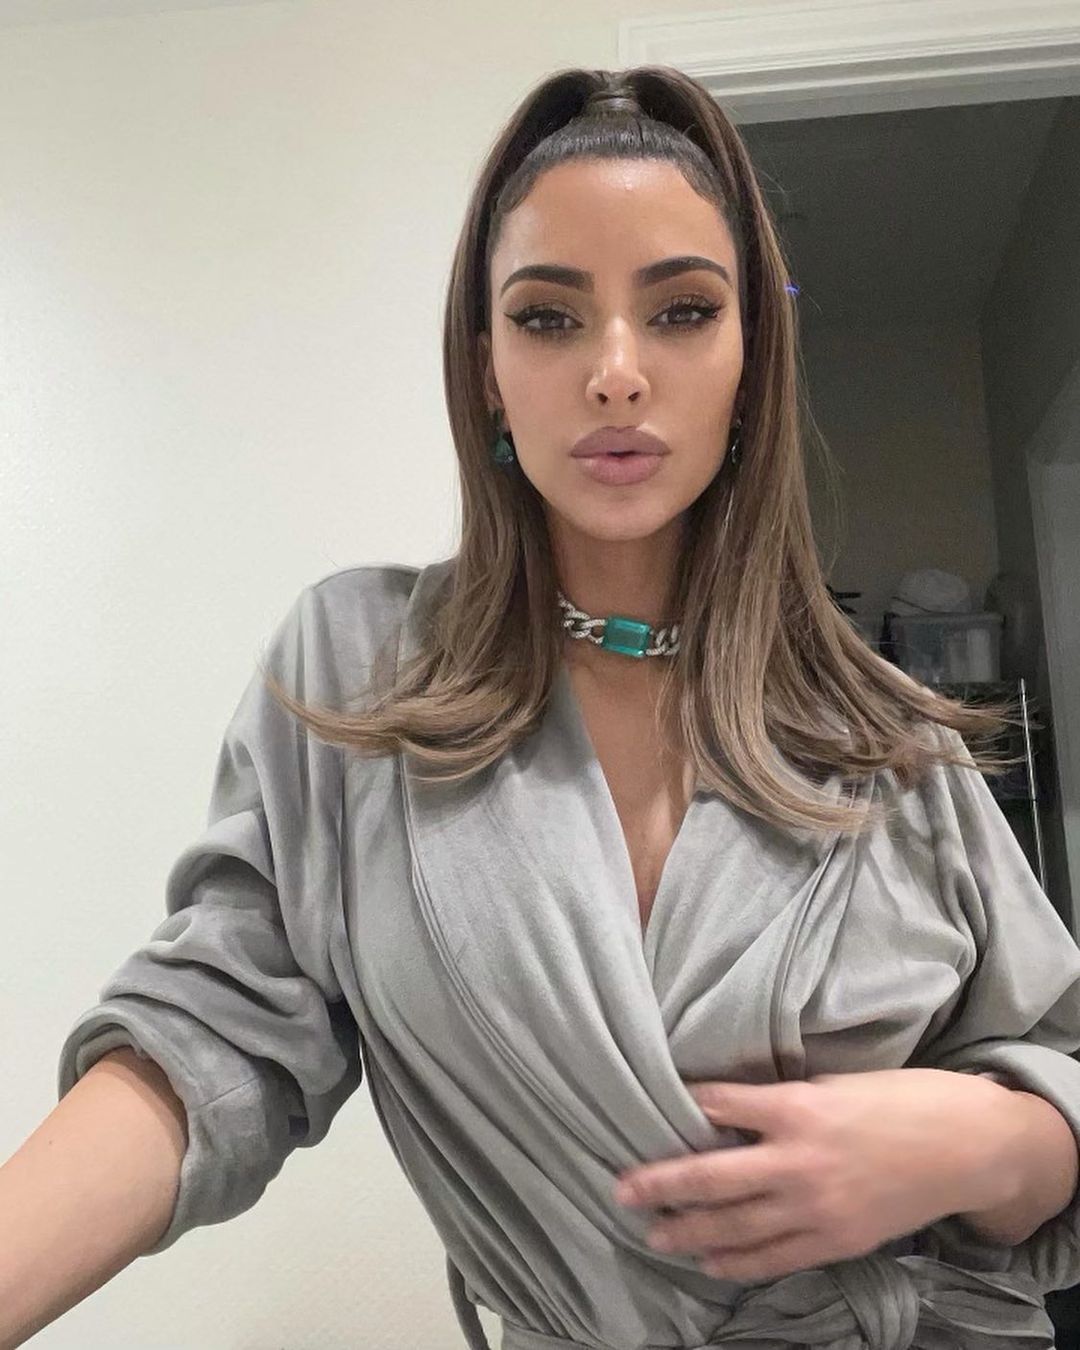 A photo of Kim Kardashian in a gray robe, while striking a pose with pouted lips facing the camera.